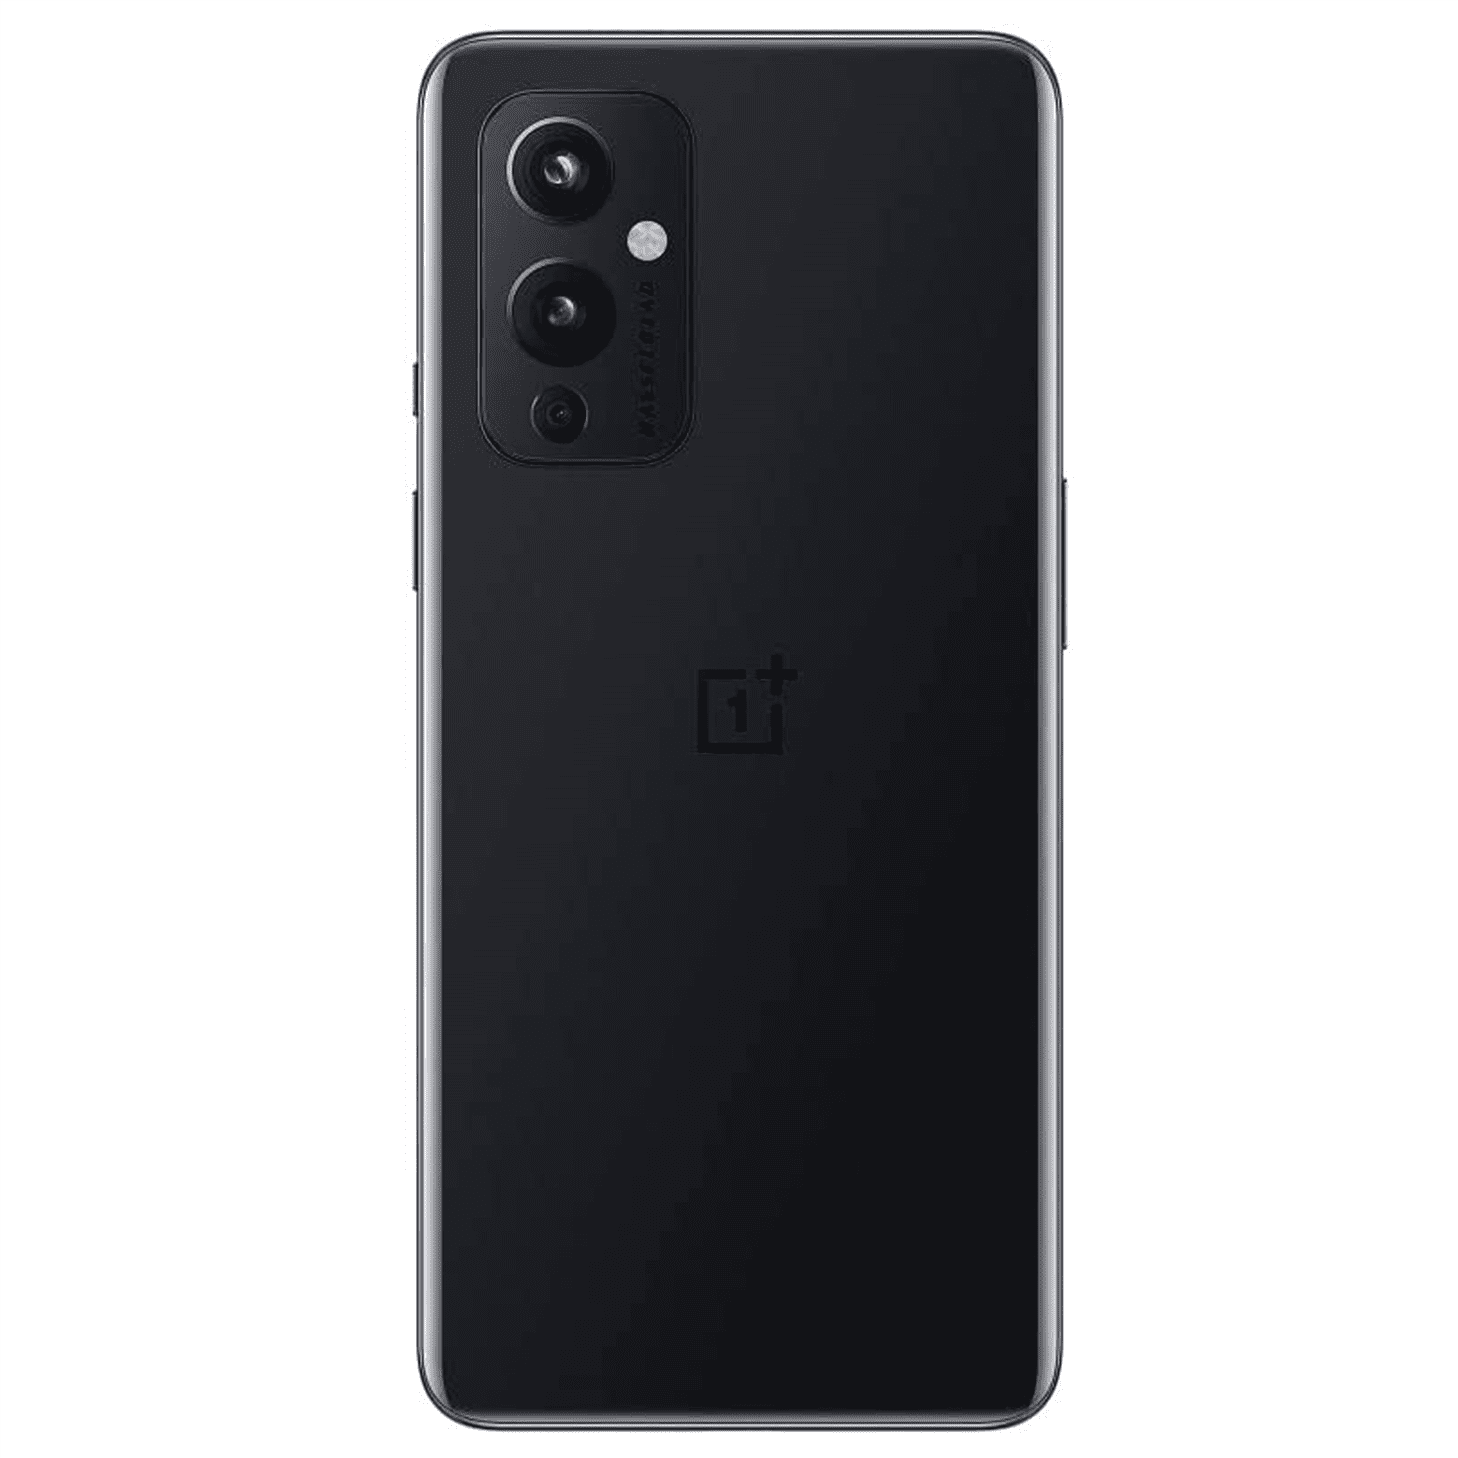 Riggear Xundd Back Cover Case for OnePlus 9R